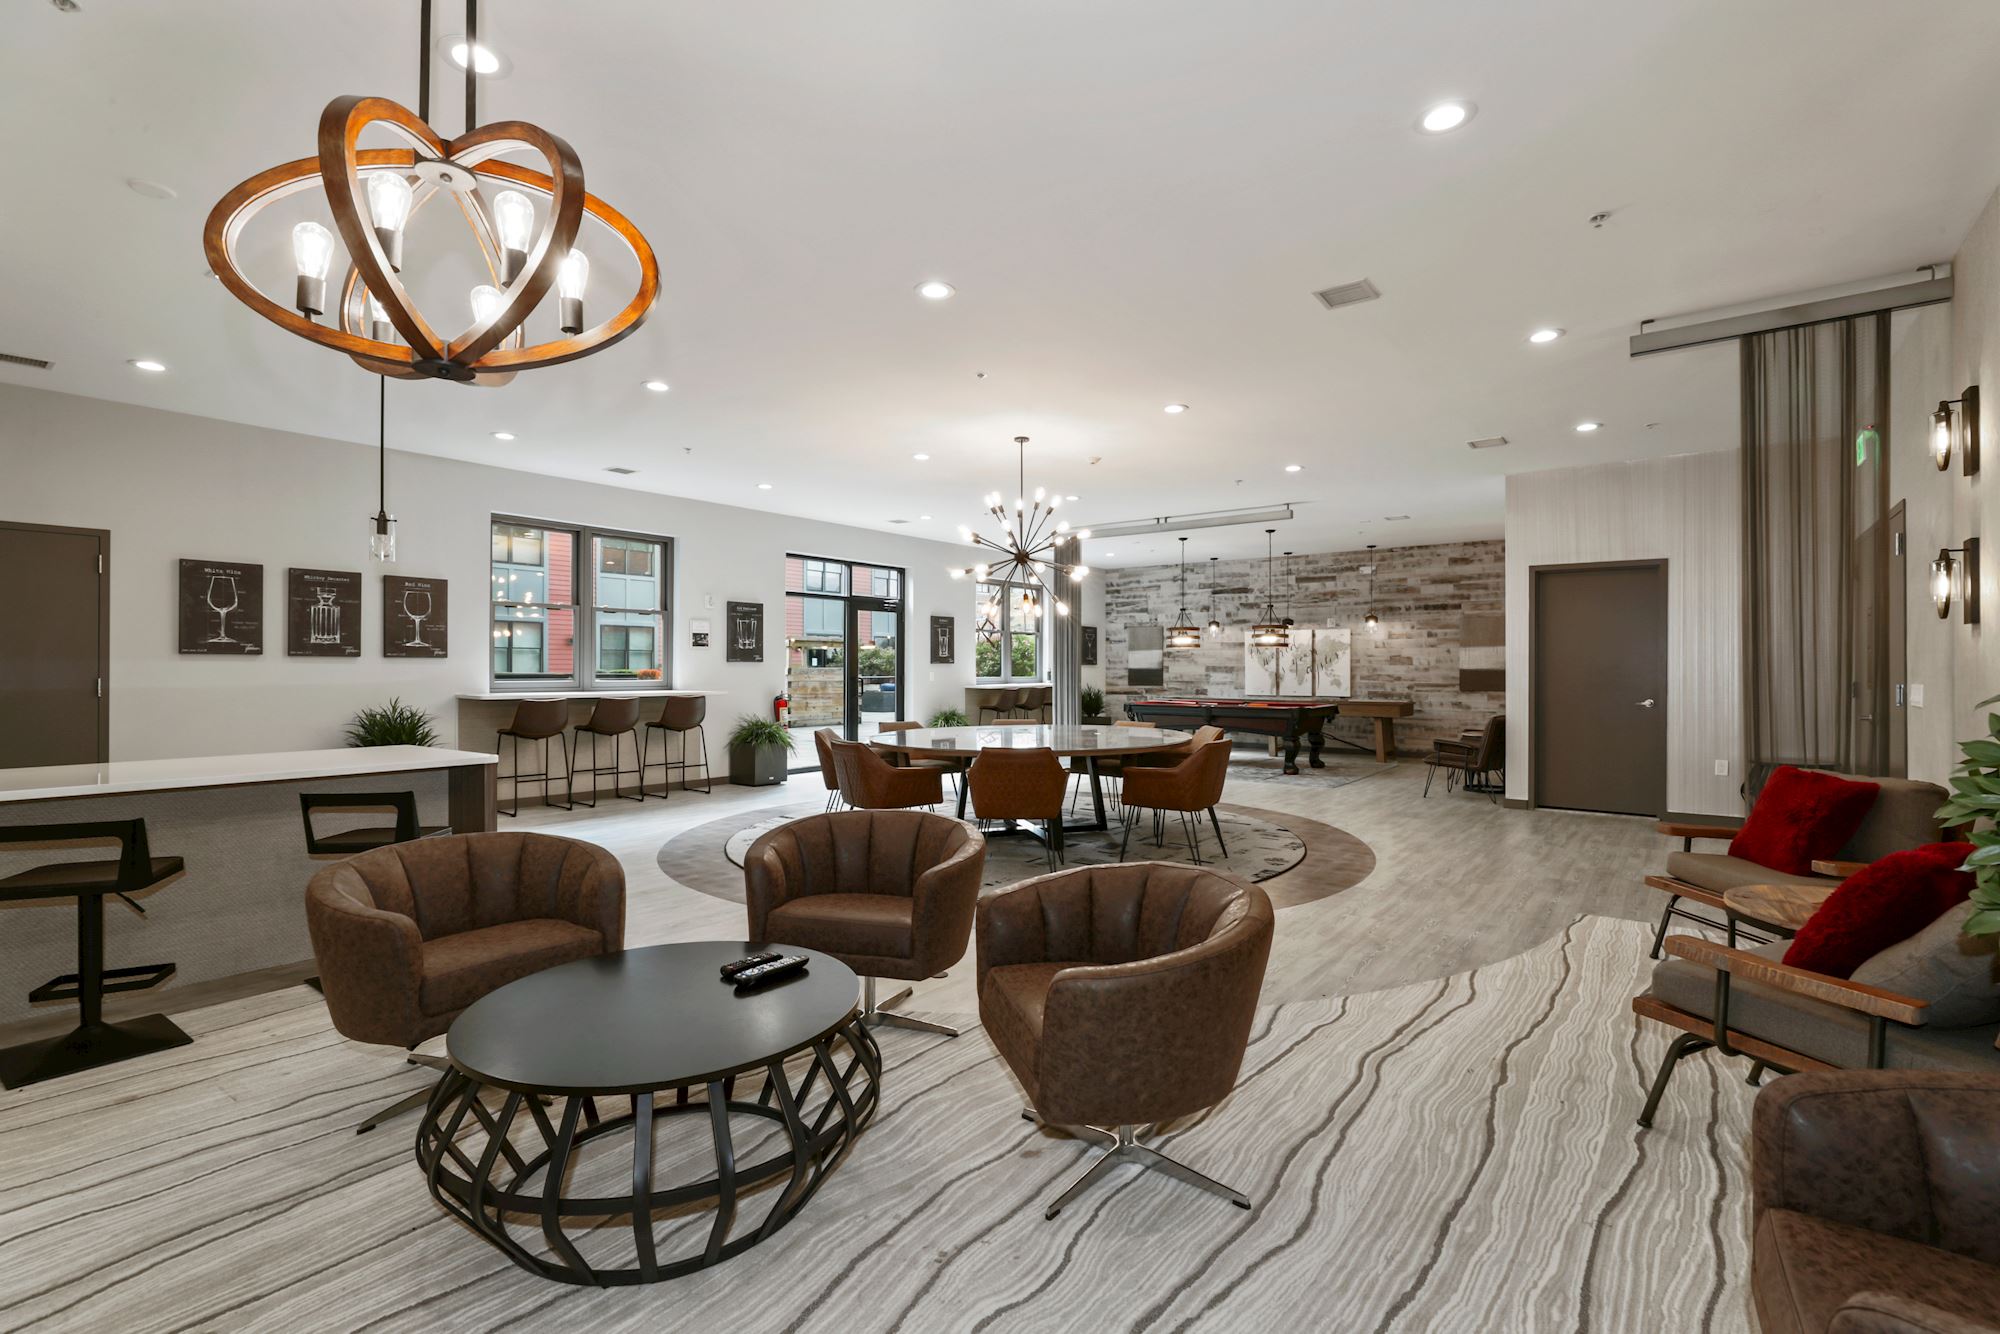 Spacious amenity areas made for collaboration and inspiration